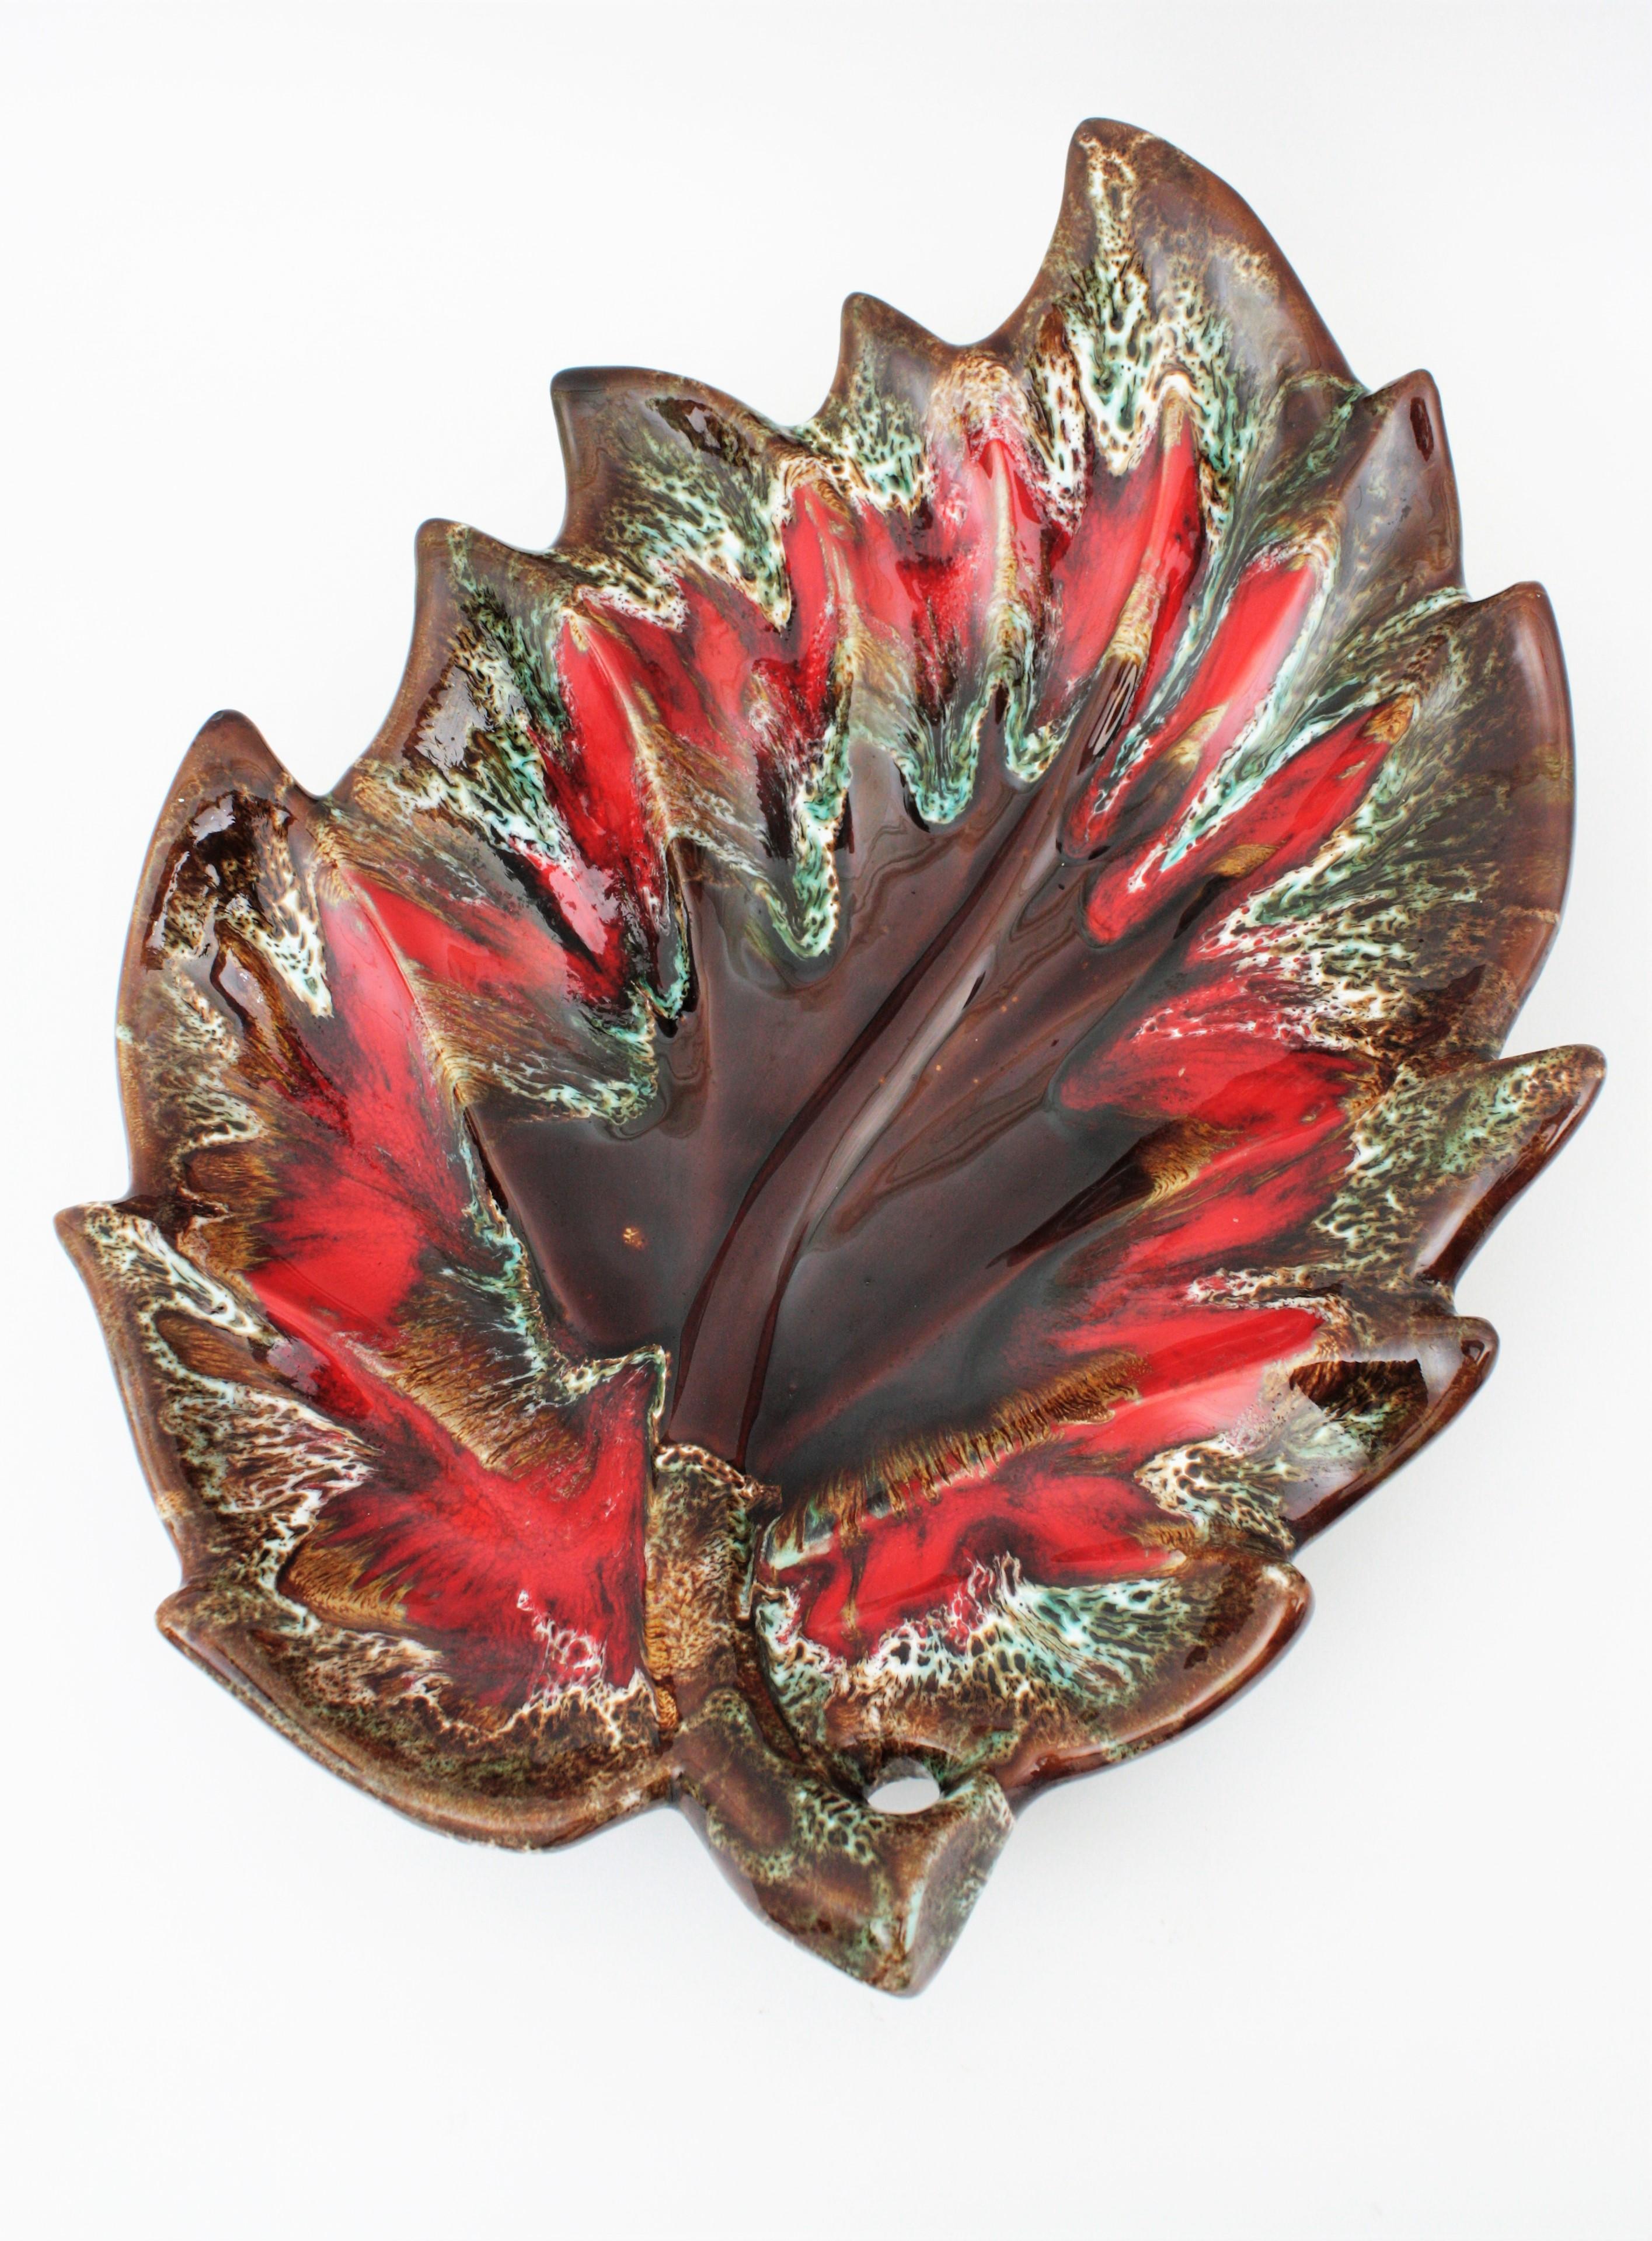 Impressive and colorful extra large leaf shaped glazed ceramic platter, serving tray or centerpiece manufactured by Vallauris. France, 1950-1960s.
Interesting to be used as centerpiece, fruit platter or cakes platter or serving tray. Its large